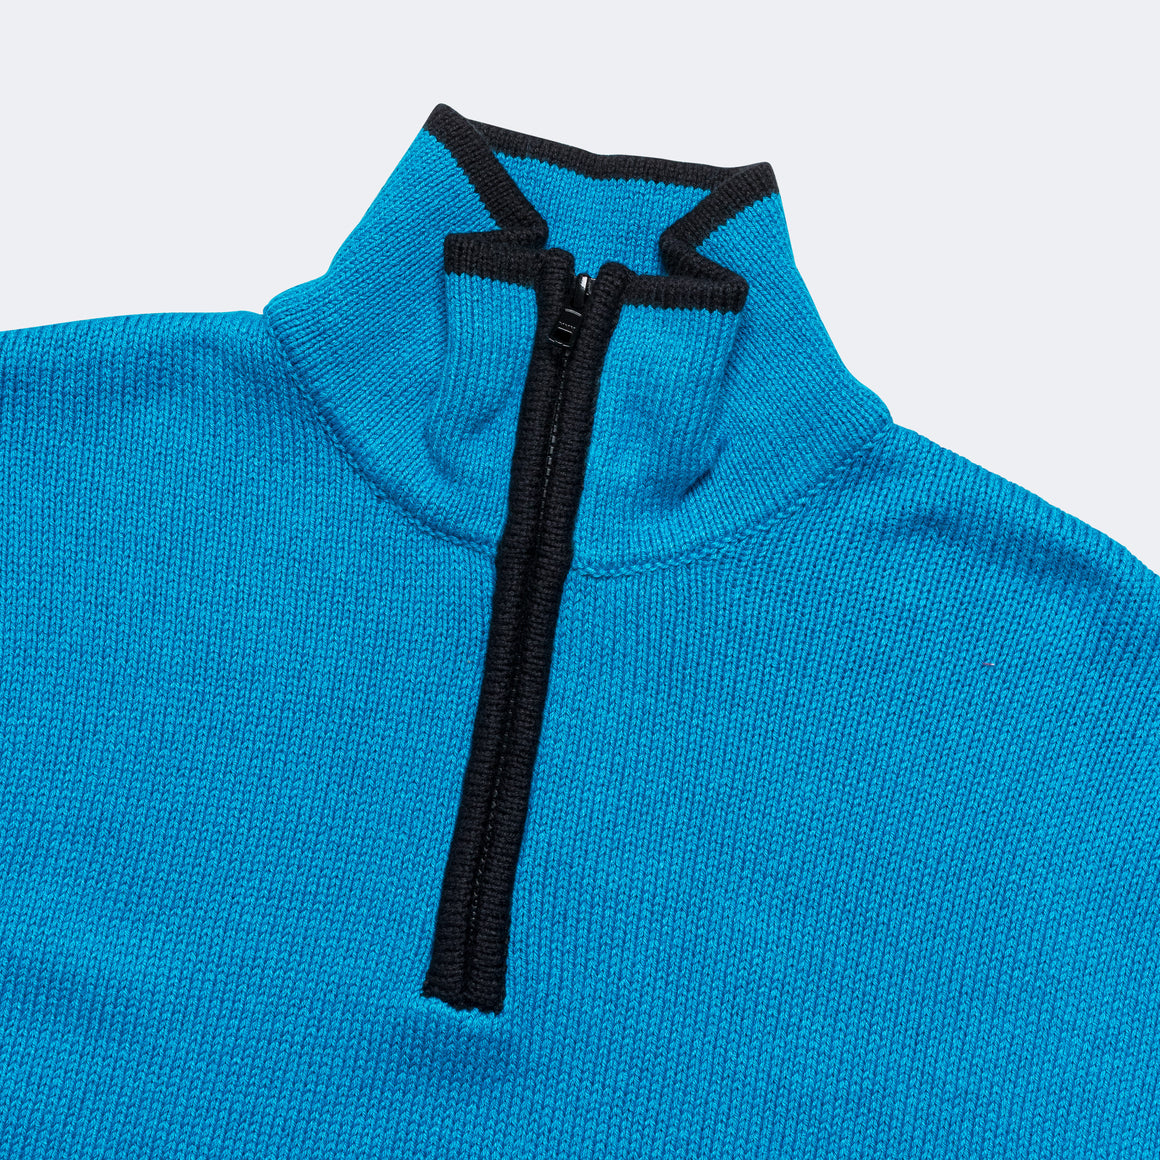 Adsum - Funnel Neck Sweater - Aqua - UP THERE